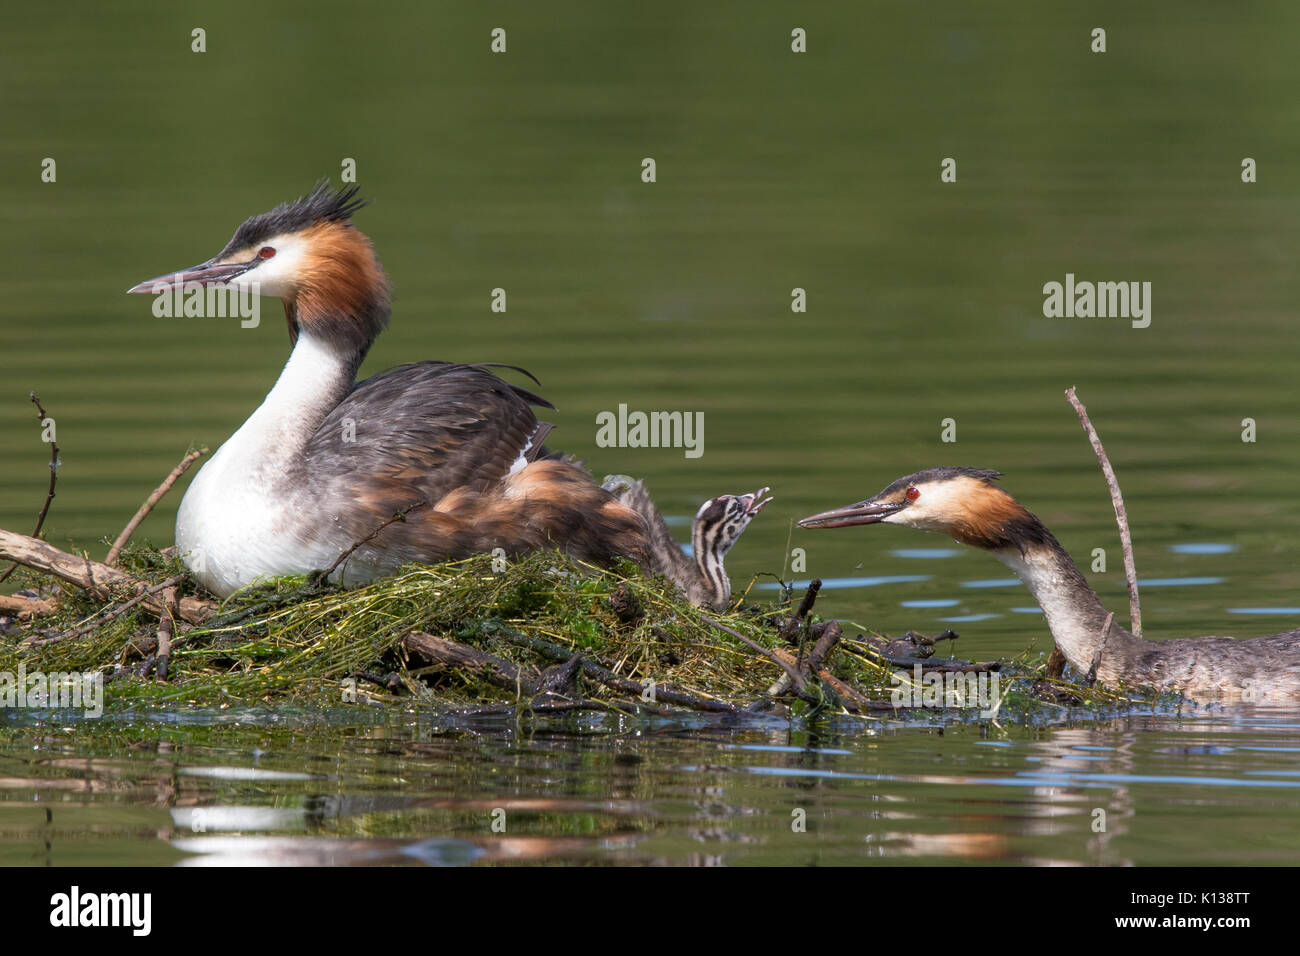 female Great Crested Grebe (Podiceps cristatus) offering food to its chick while the male sits on the nest incubating eggs Stock Photo